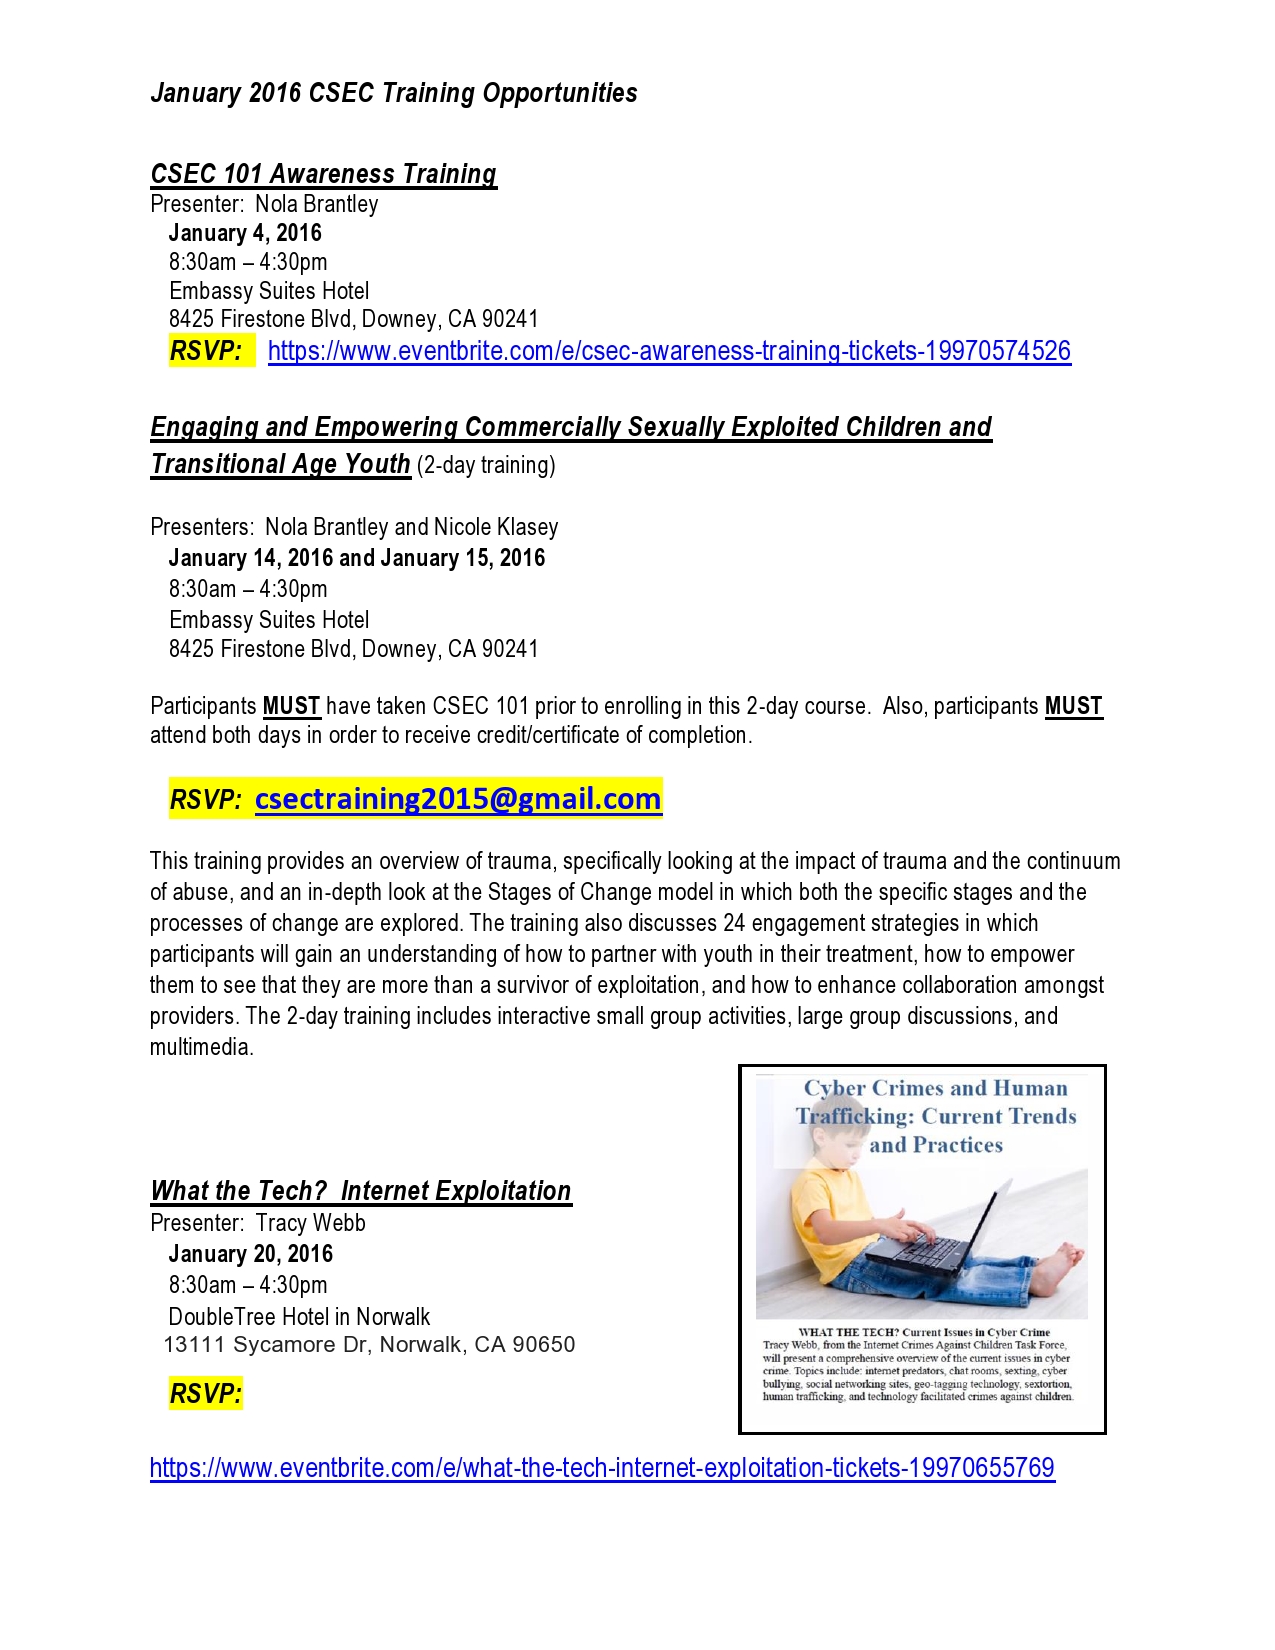 JANUARY CSEC TRAINING OPPORTUNITIES-page0001